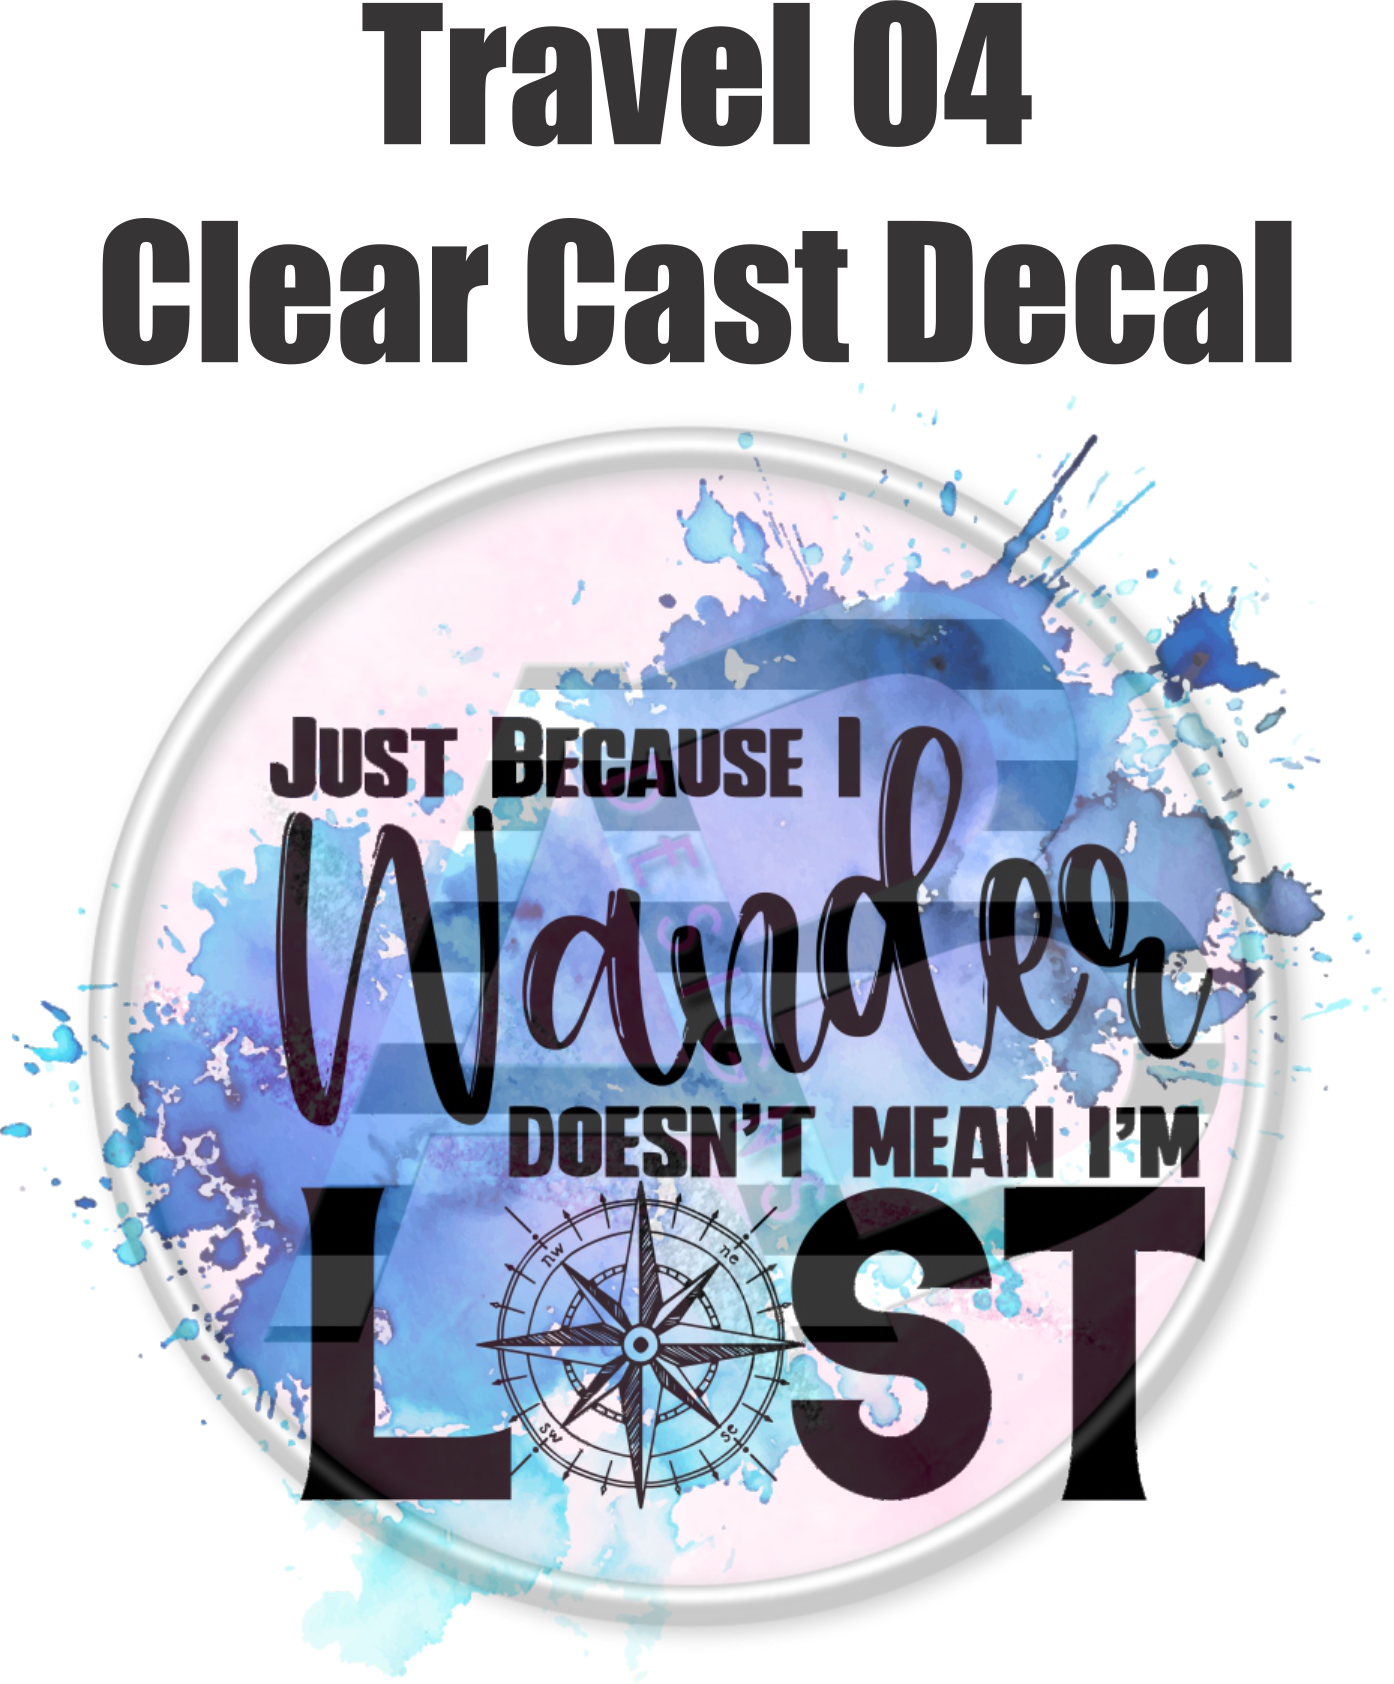 Travel 04 - Clear Cast Decal